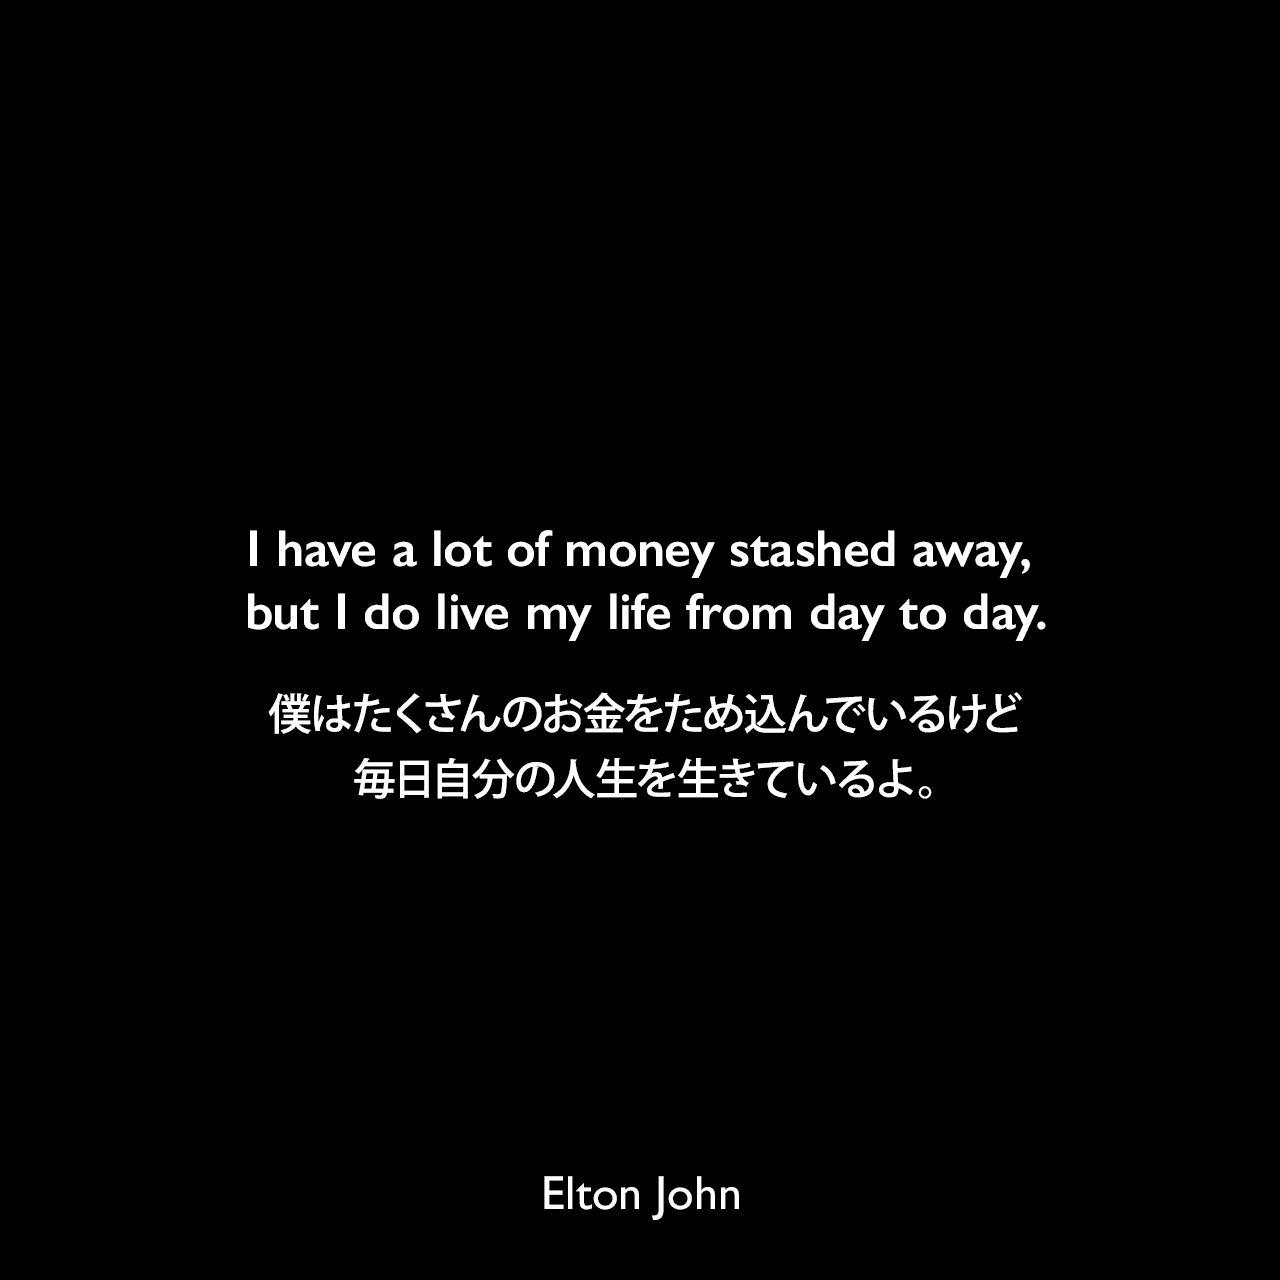 I have a lot of money stashed away, but I do live my life from day to day.僕はたくさんのお金をため込んでいるけど、毎日自分の人生を生きているよ。Elton John